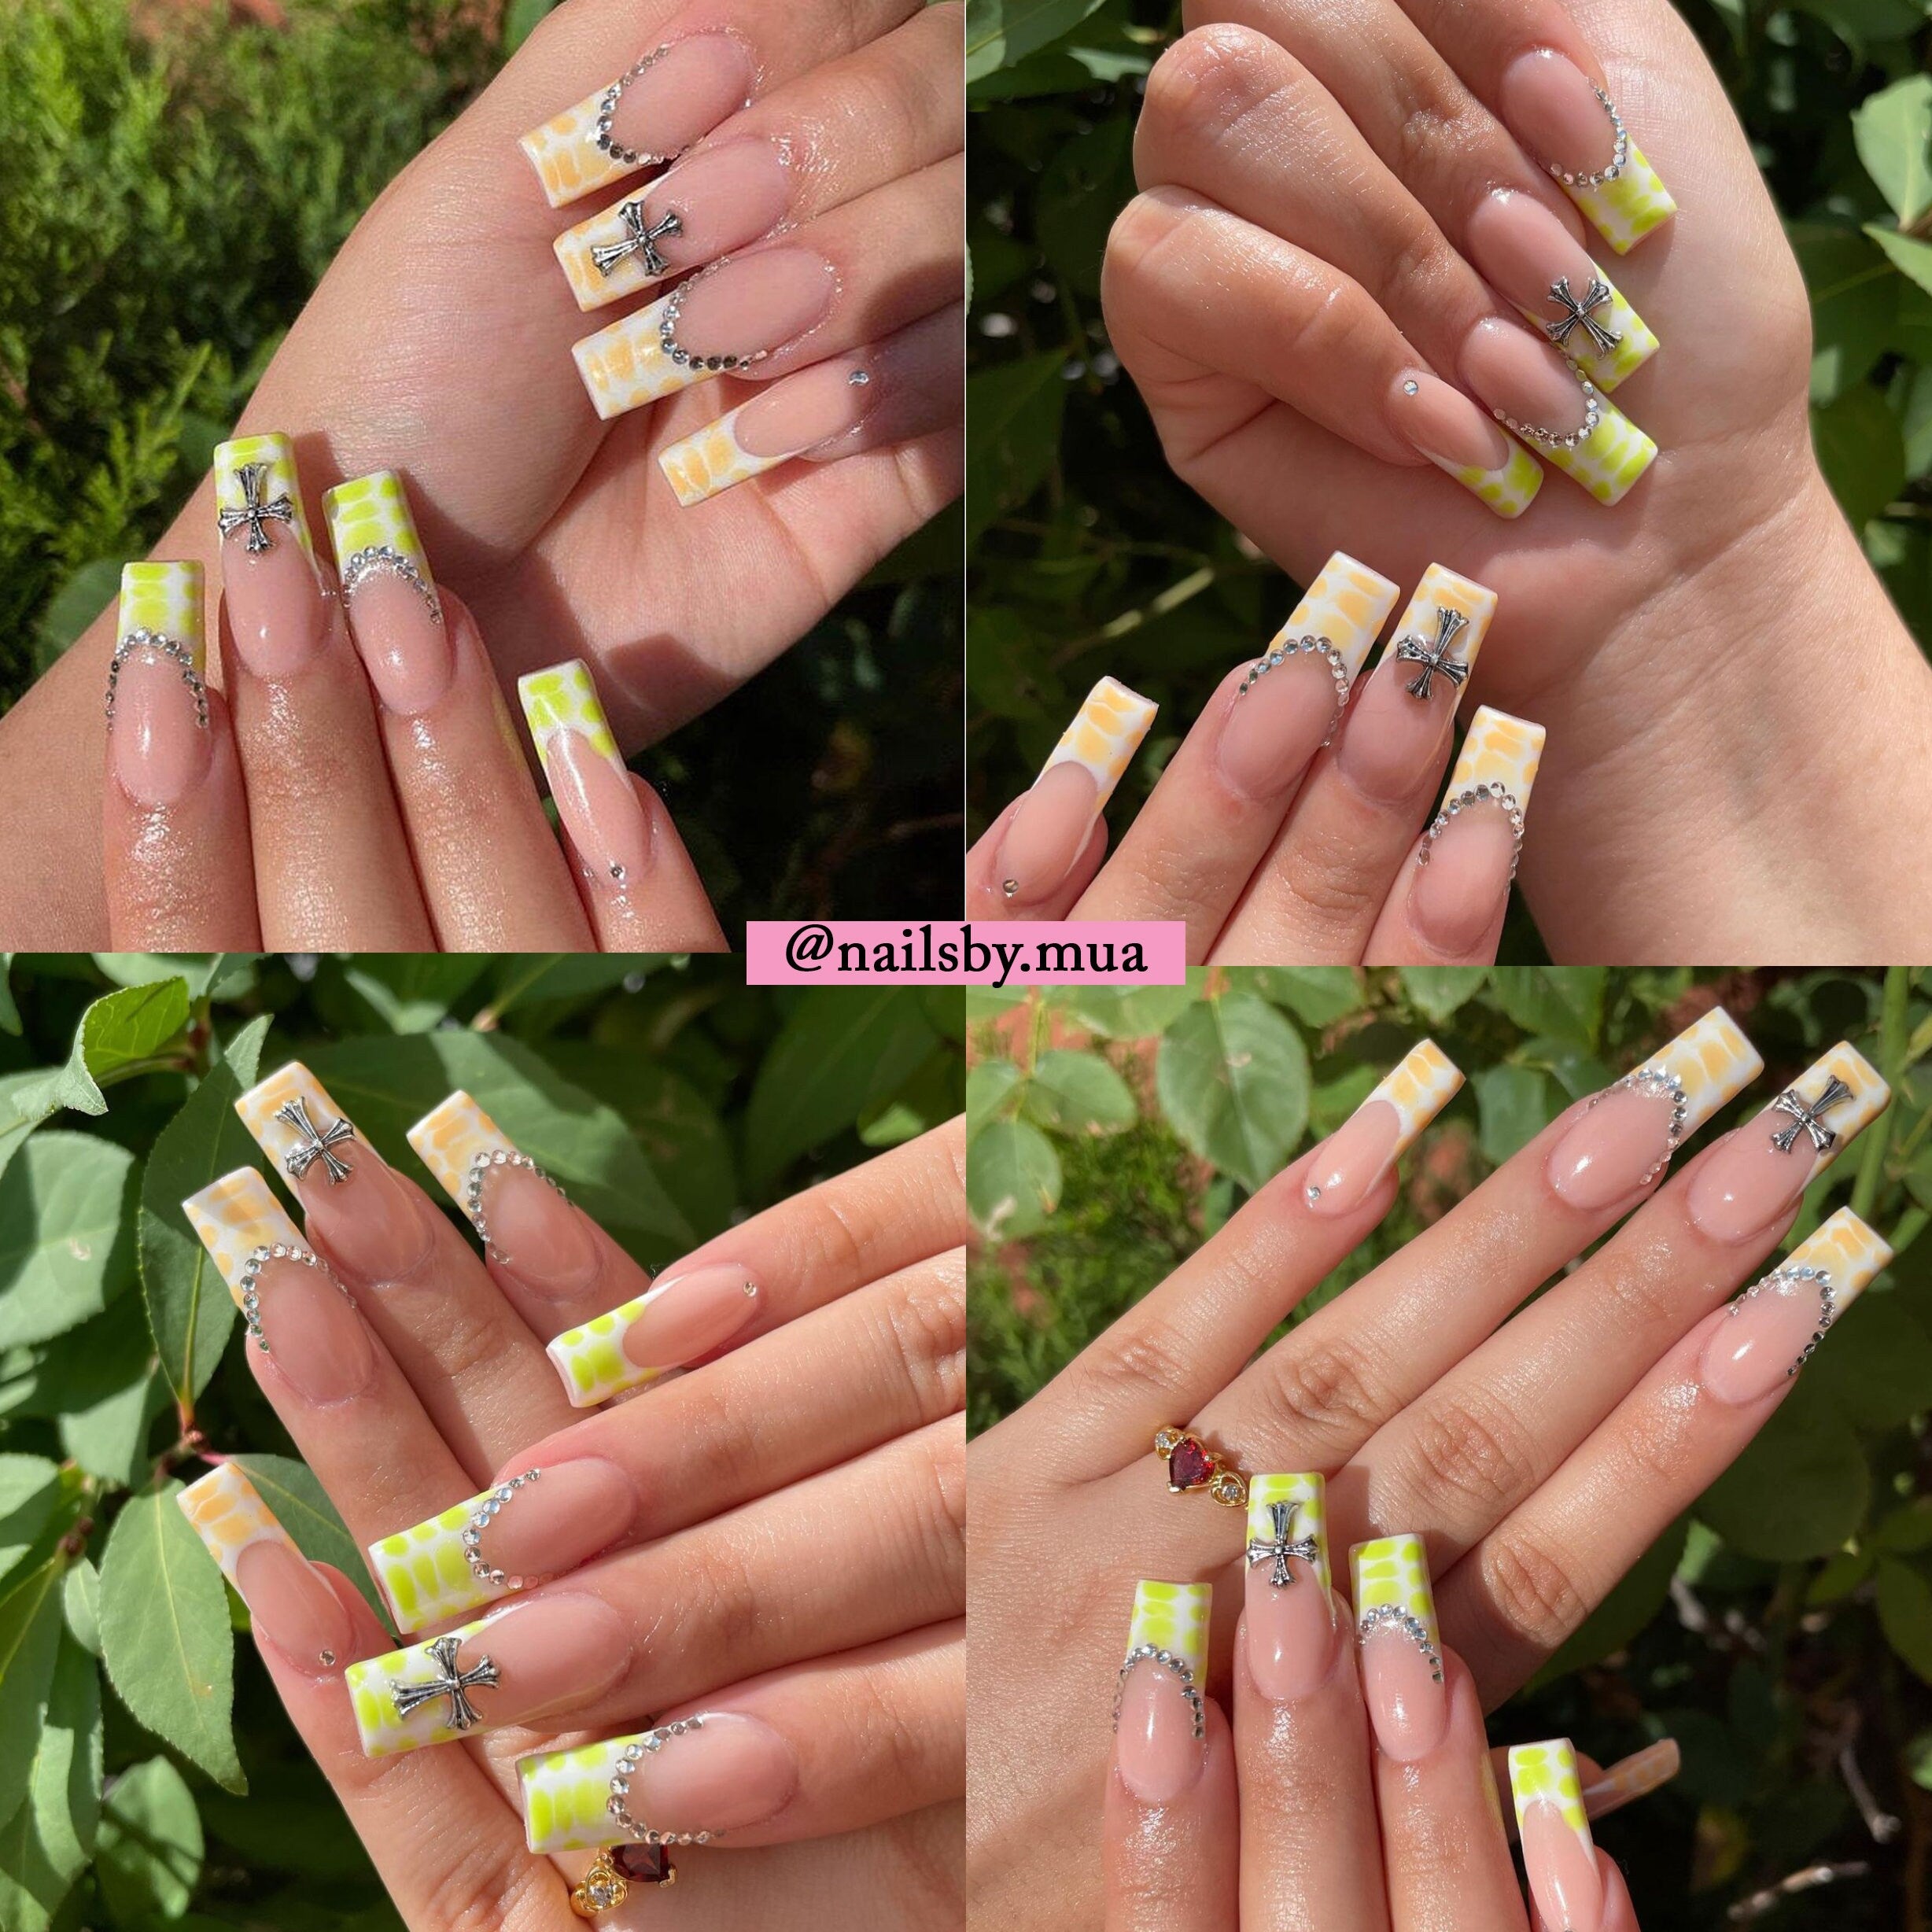 13 Gold Chrome Nail Designs That Are *So* Main Character-Coded